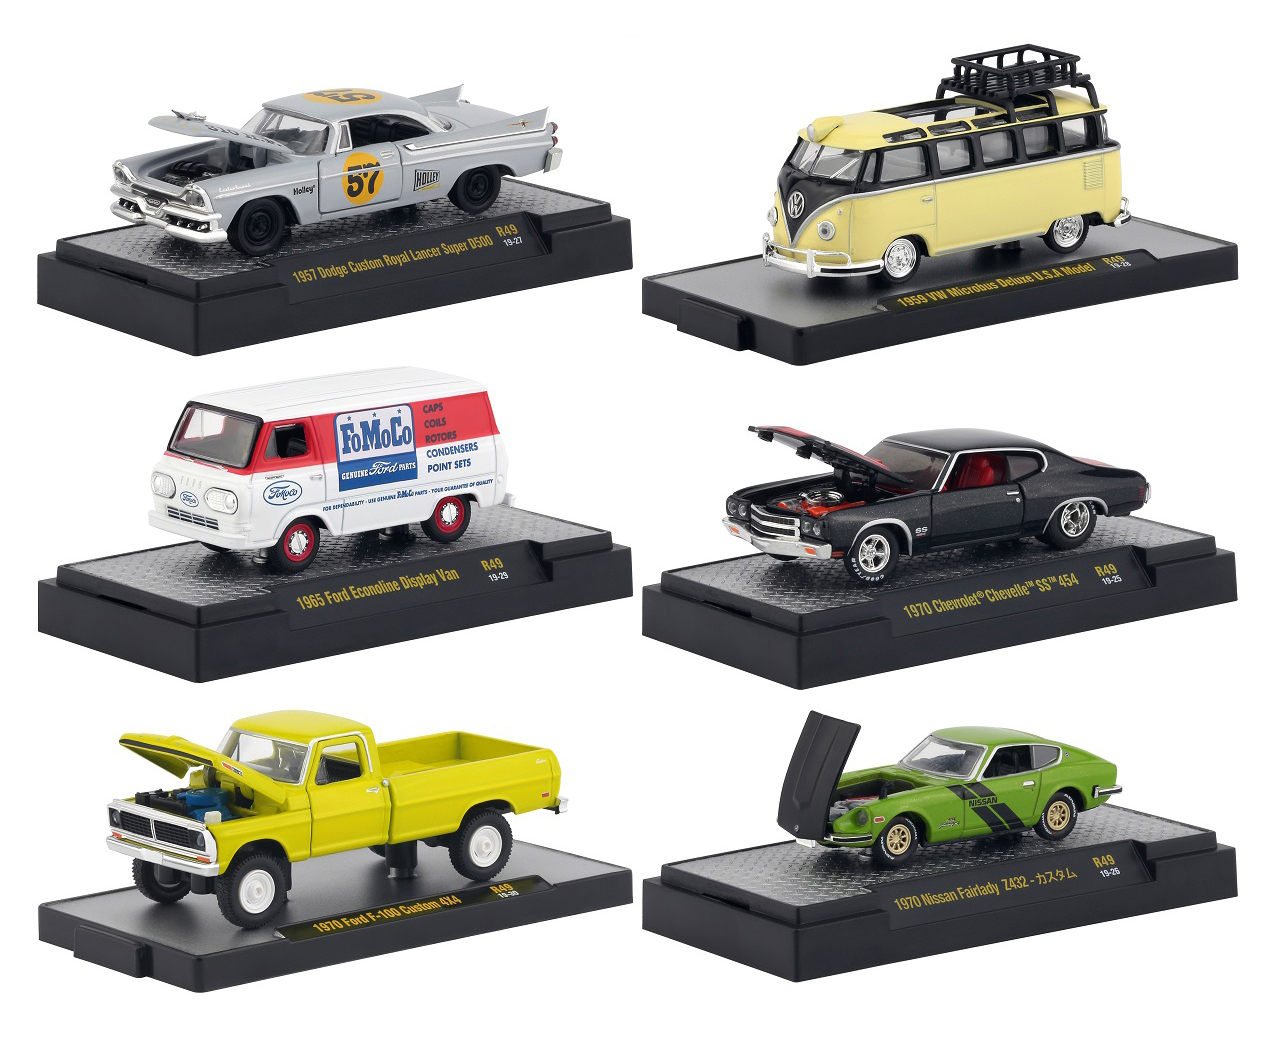 "auto Meets" Release 49 Set Of 6 Cars In Display Cases 1/64 Diecast Model Cars By M2 Machines